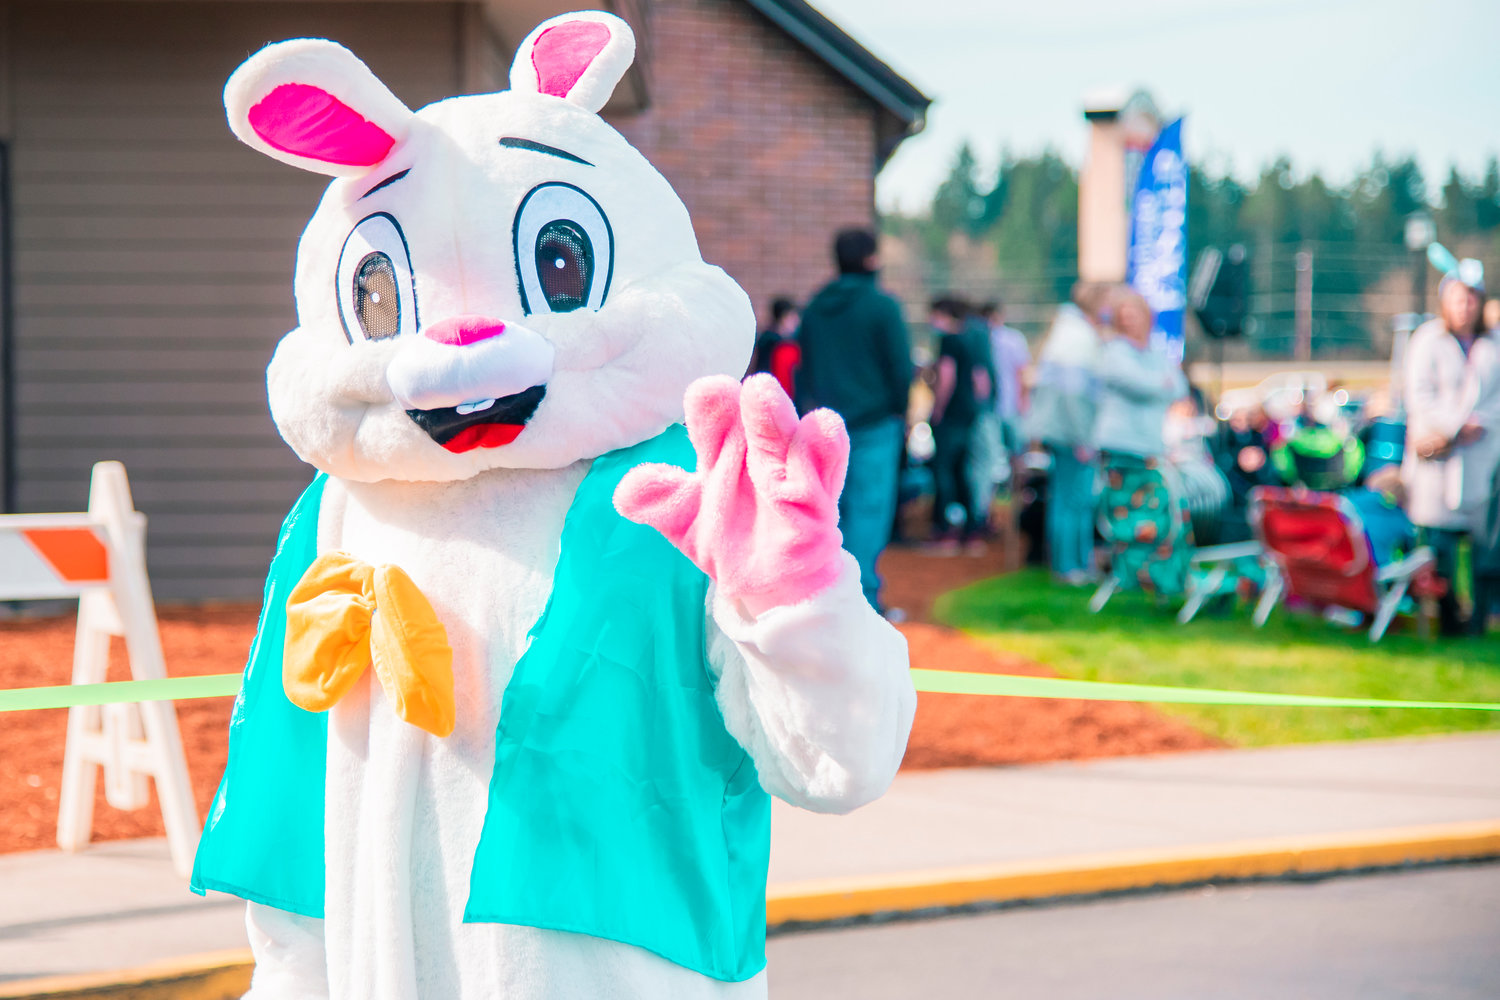 The Easter Bunny waves to visitors at Bethel Church during an event on Saturday in Chehalis.